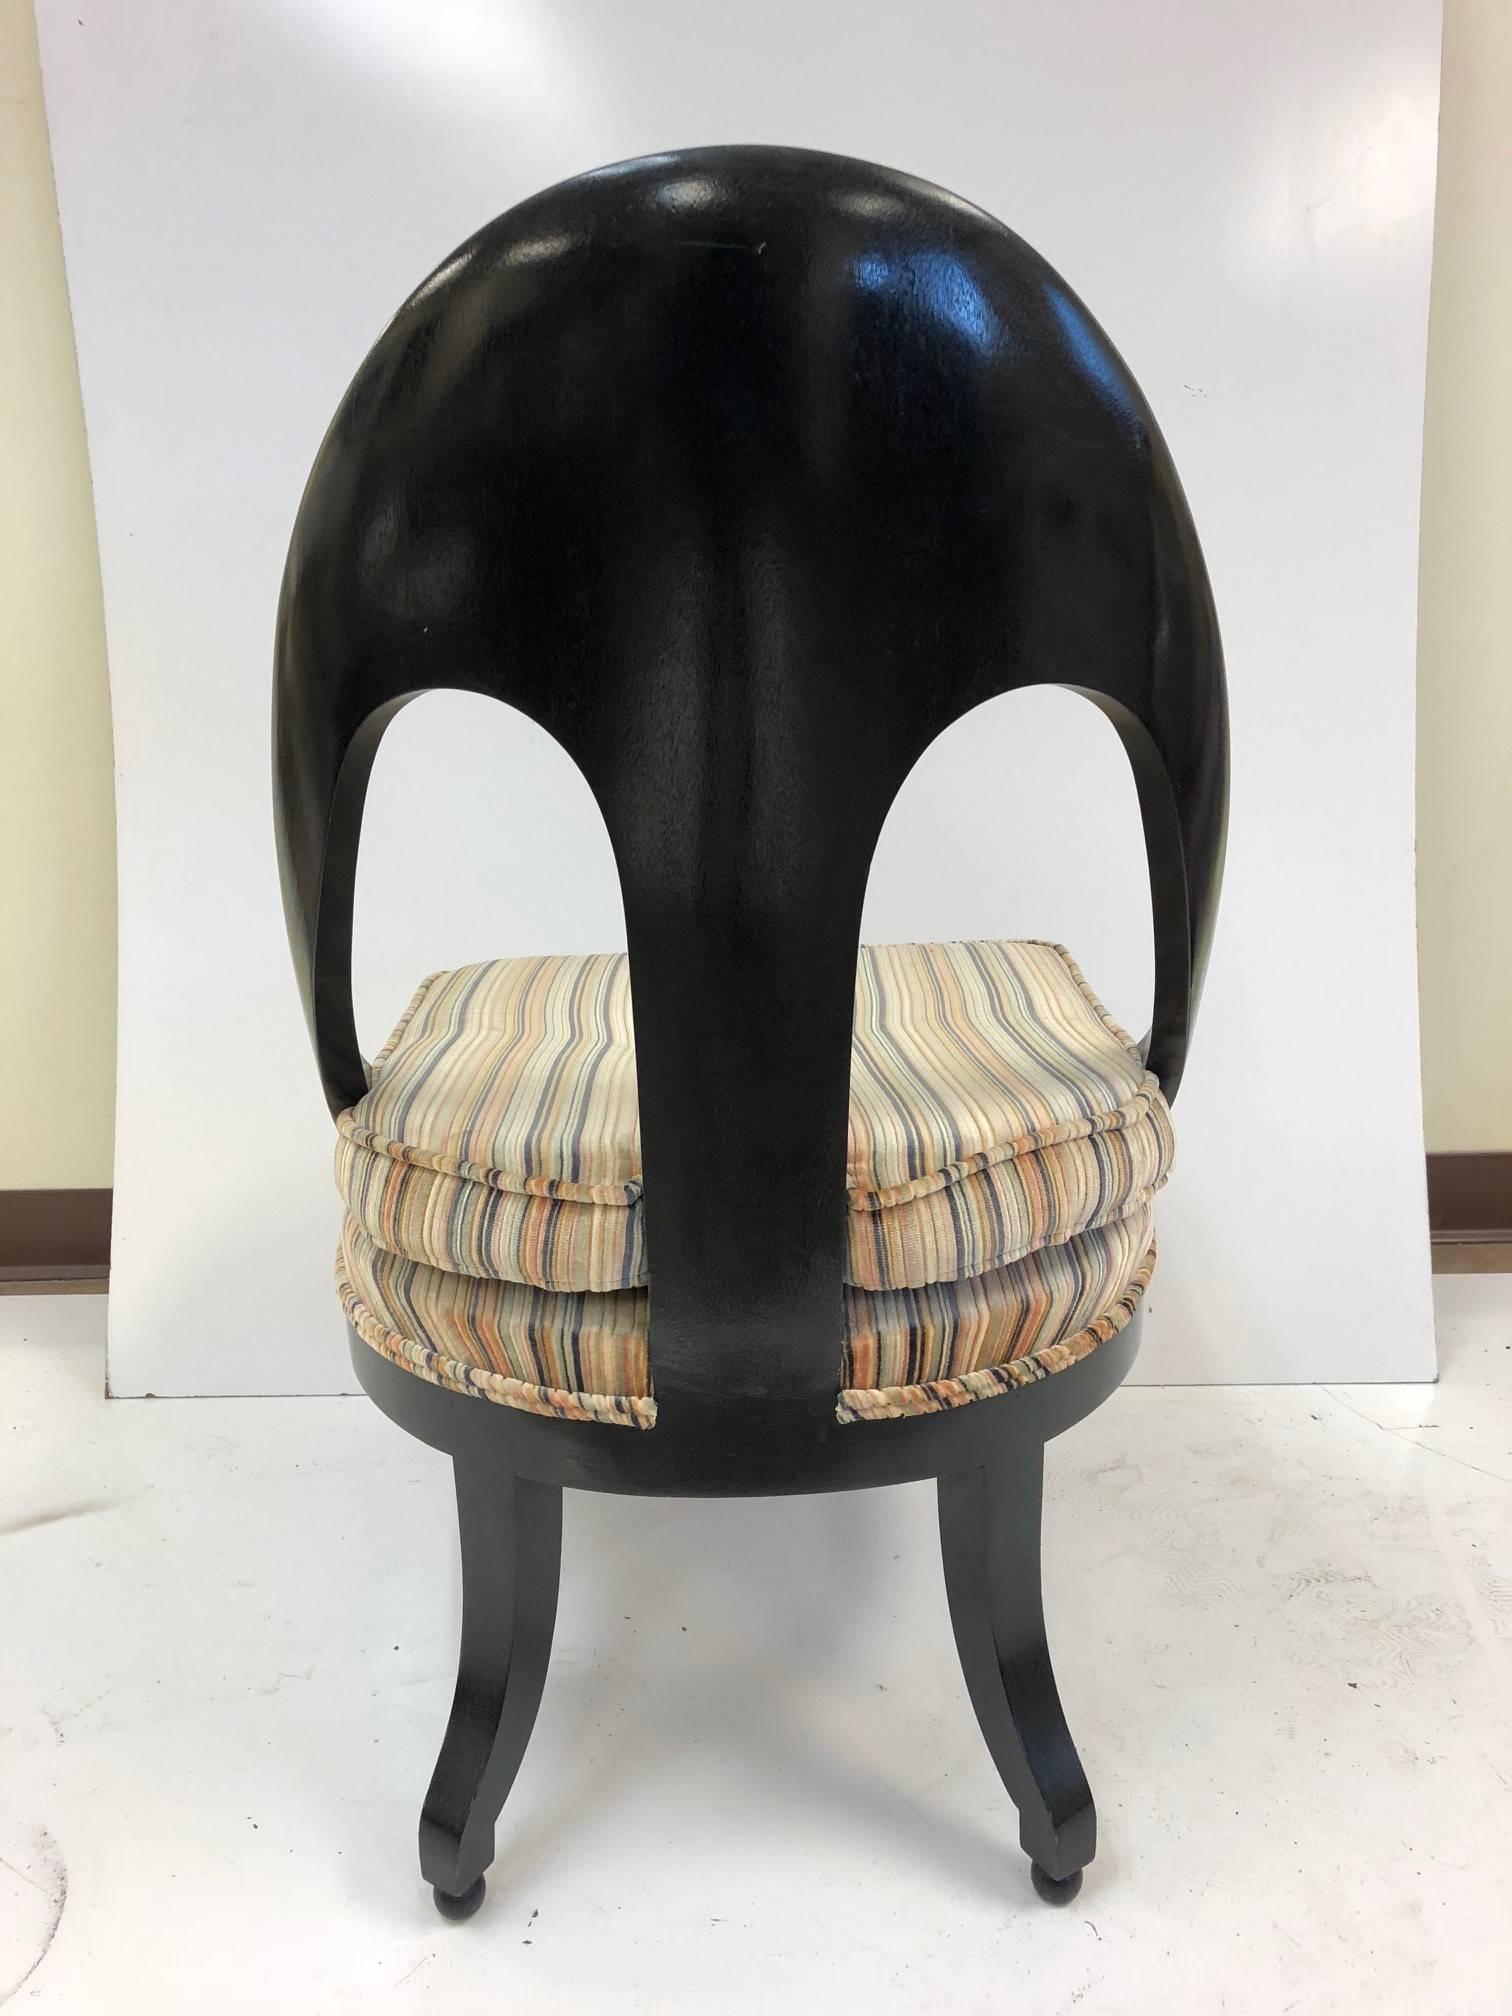 Lacquered Pair of Spoon Back Chairs with Mother-of-Pearl Inlay